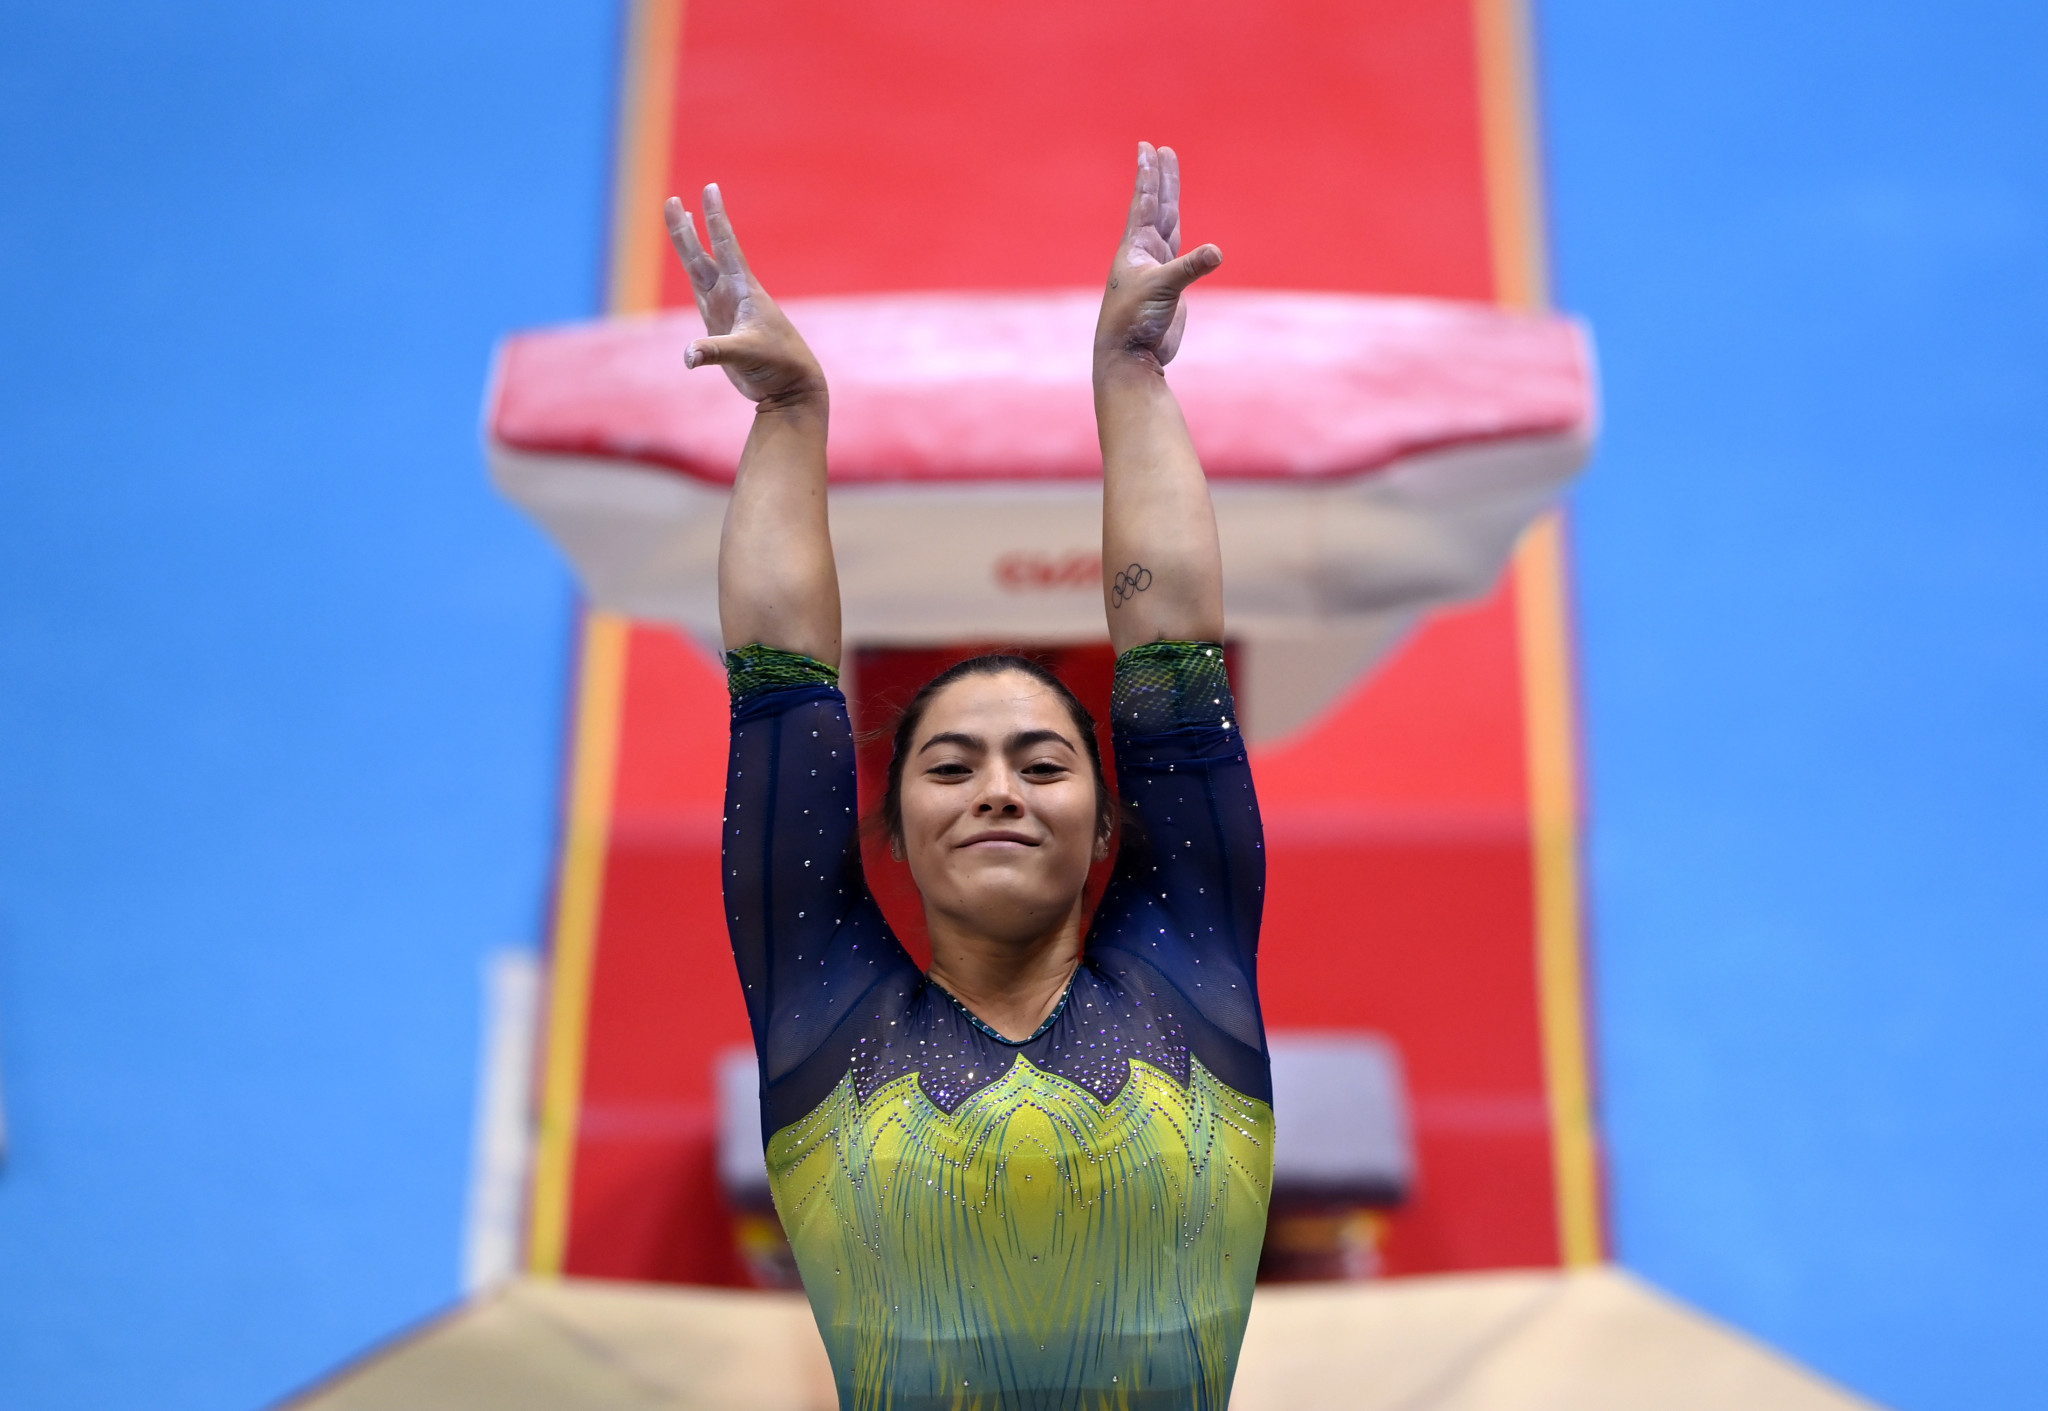 Australia's Georgia Godwin won gold in floor exercise and vault at the FIG World Challenge Cup in Tel Aviv ©Getty Images